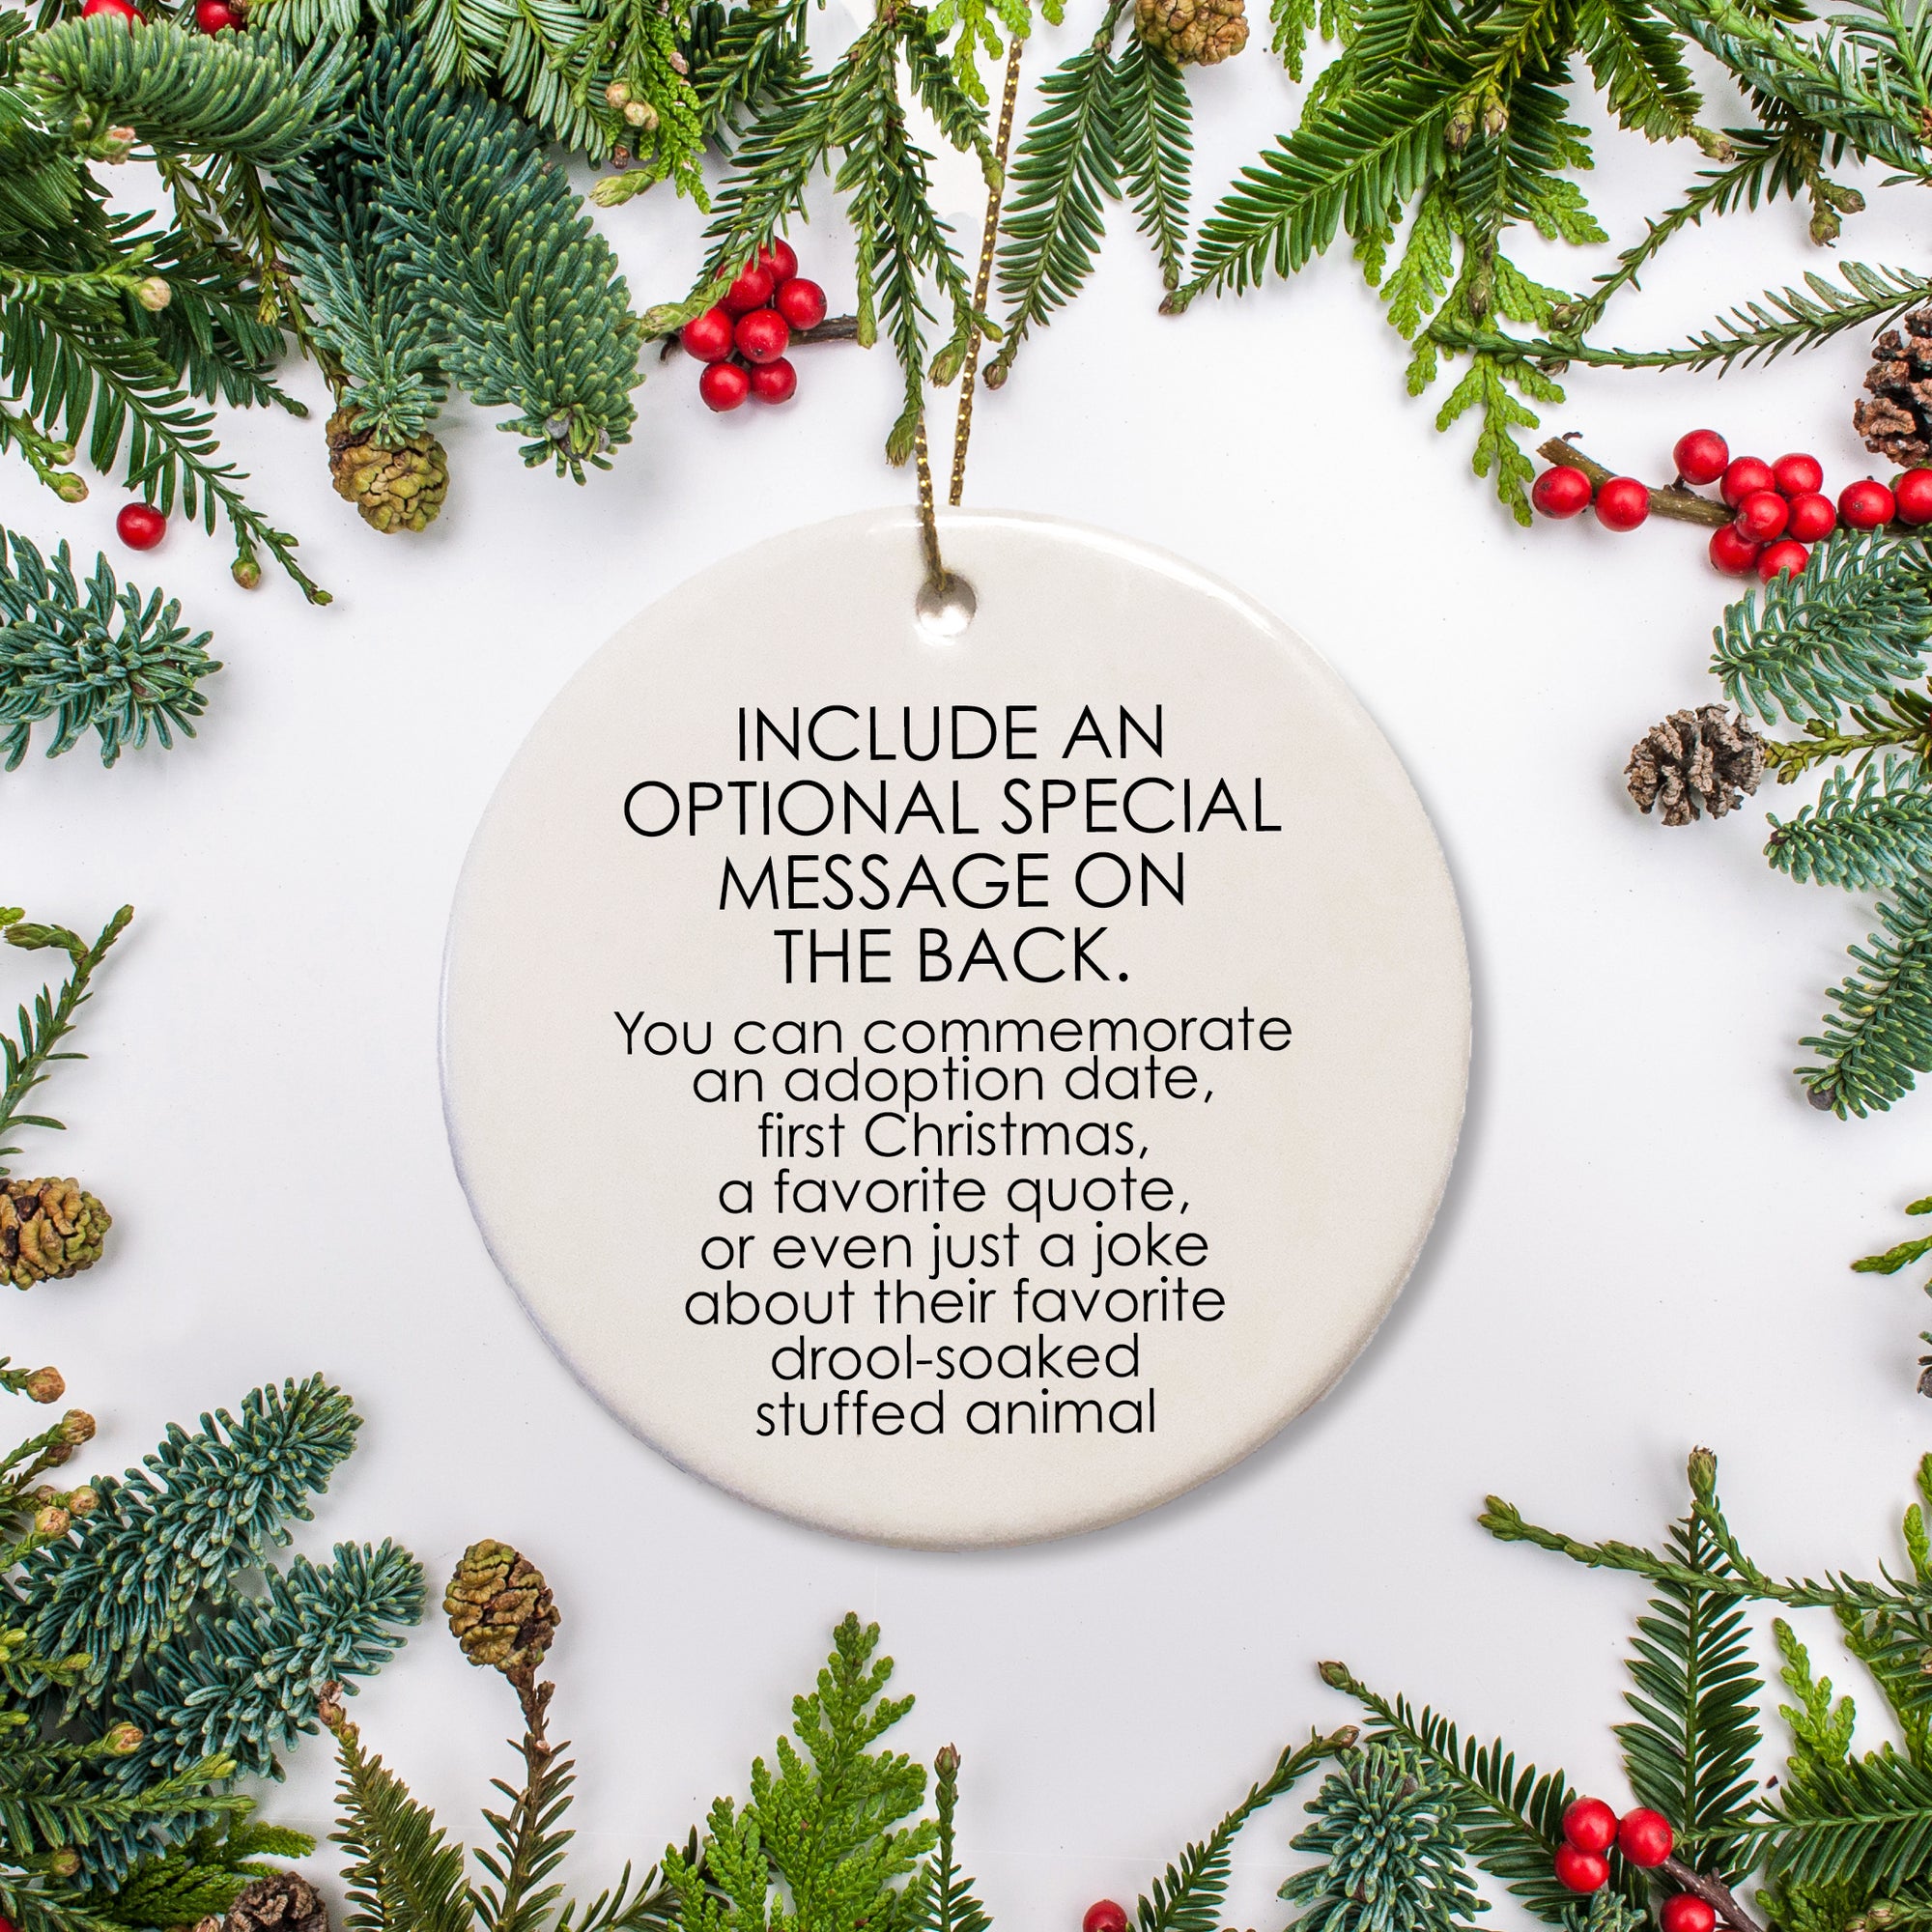 You can include an optional special message on the back of the ornament.  It could be: an adoption date, a first christmas, a favorite quote, or even a joke about their favorite drool-soaked stuffed animal.